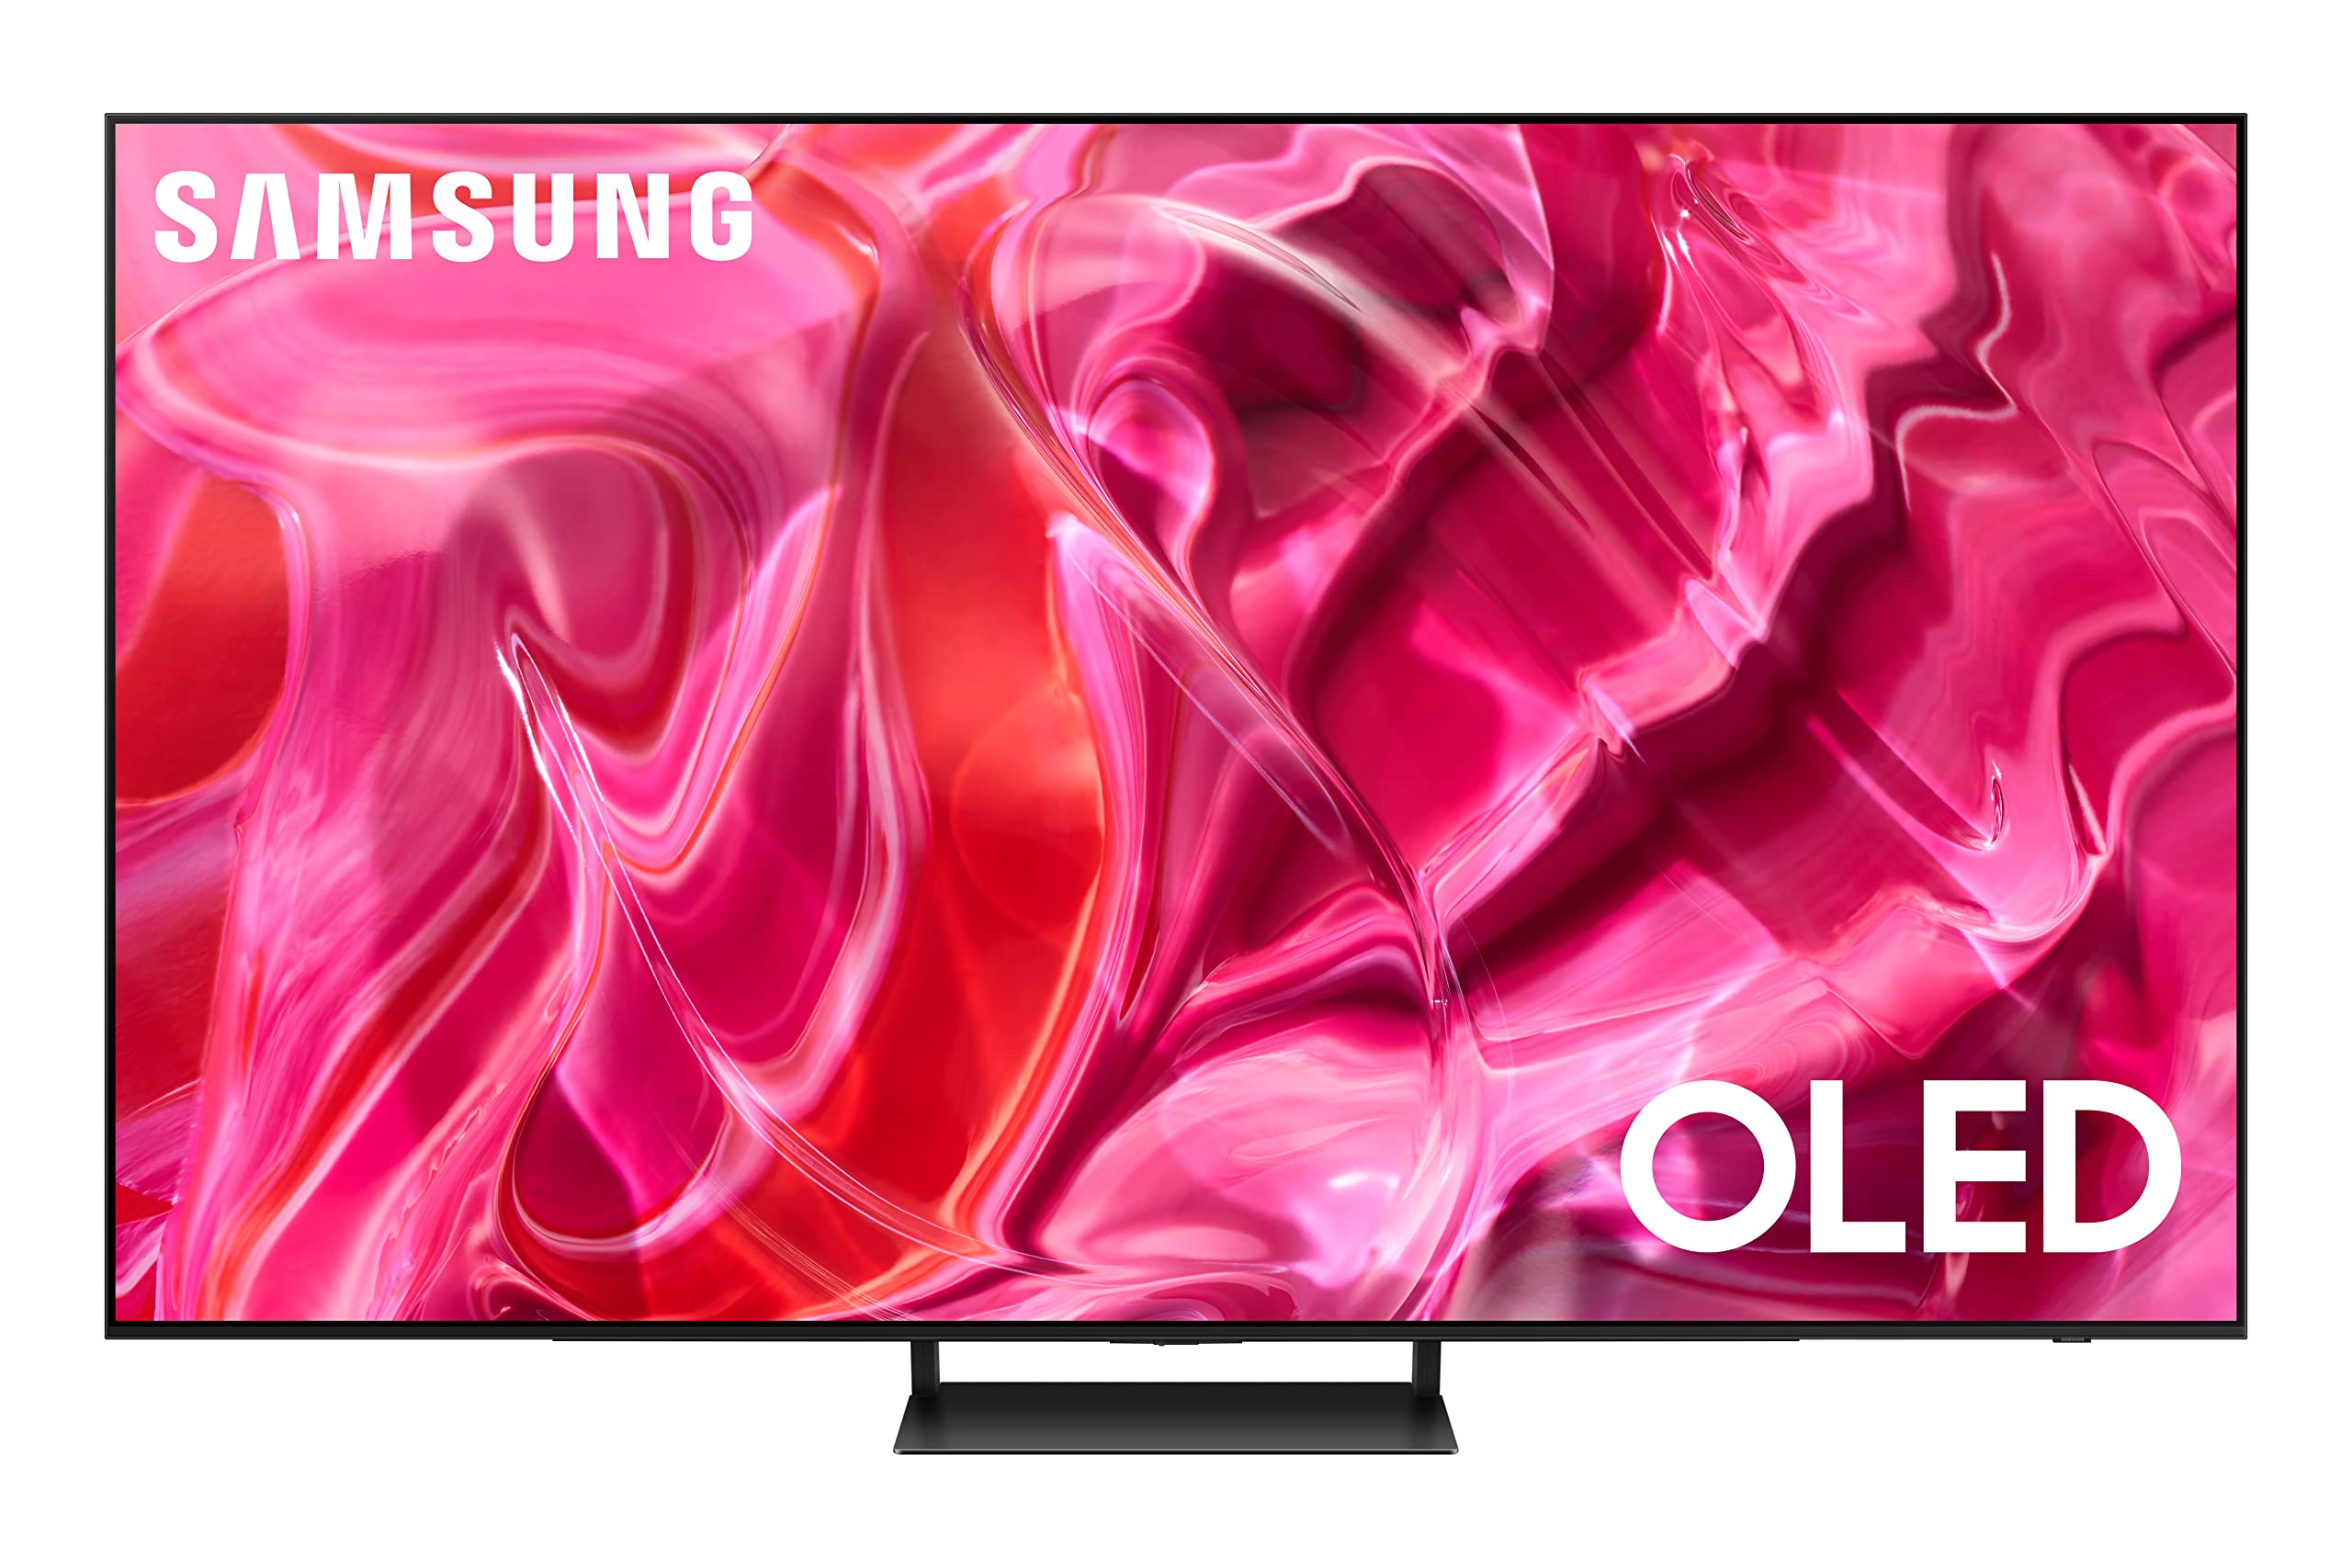 65" SAMSUNG S90C Class OLED 4K Smart Television $1600 + Free Shipping